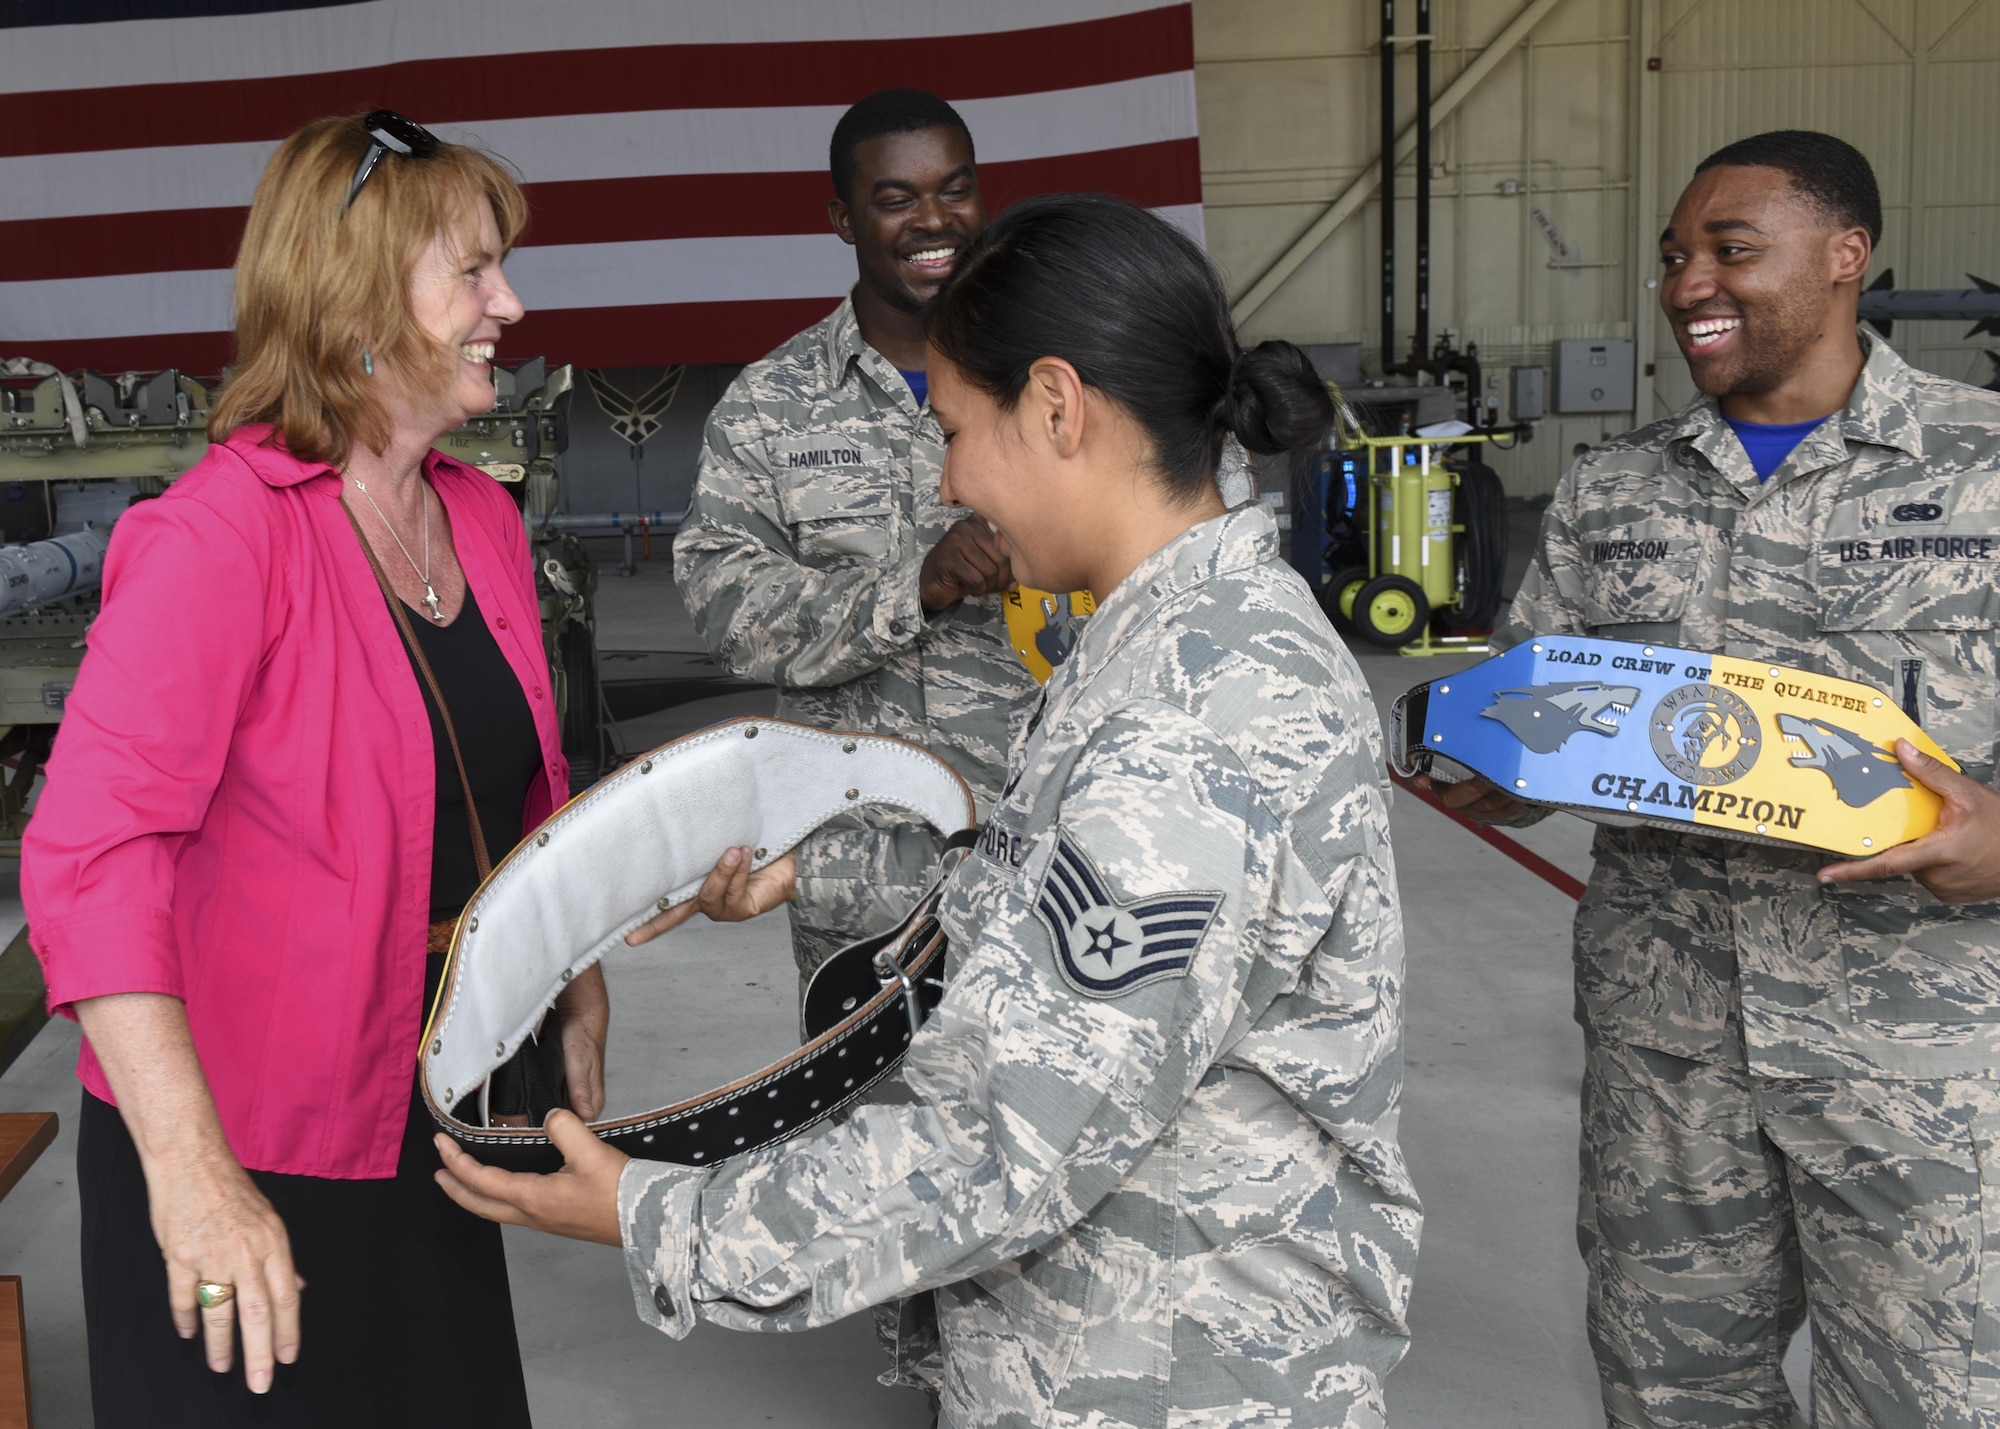 Christina Olds, daughter of Brig. Gen. Robin Olds, presents awards to U.S. Air Force Airmen assigned to the 35th aircraft maintenance unit for winning the quarterly weapons load competition at Kunsan Air Base, Republic of Korea, July 14, 2017. Kunsan held the competition in conjunction with Ms. Olds’ visit to commemorate her father, Robin Olds, 95th birthday. (U.S. Air Force photo by Senior Airman Michael Hunsaker/Released)